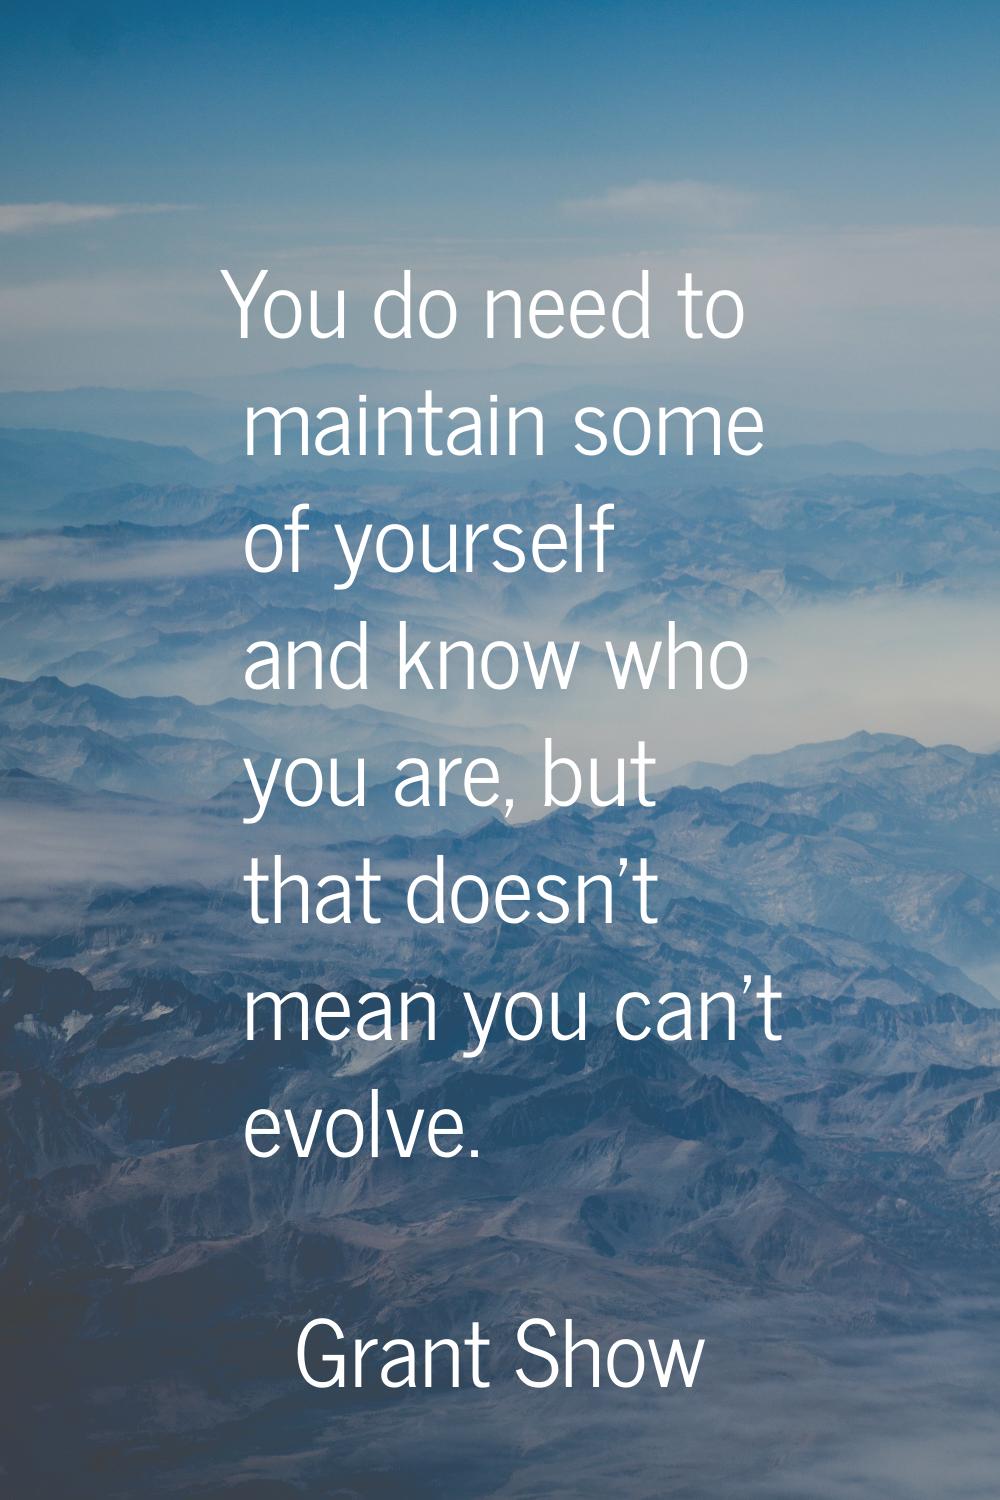 You do need to maintain some of yourself and know who you are, but that doesn't mean you can't evol